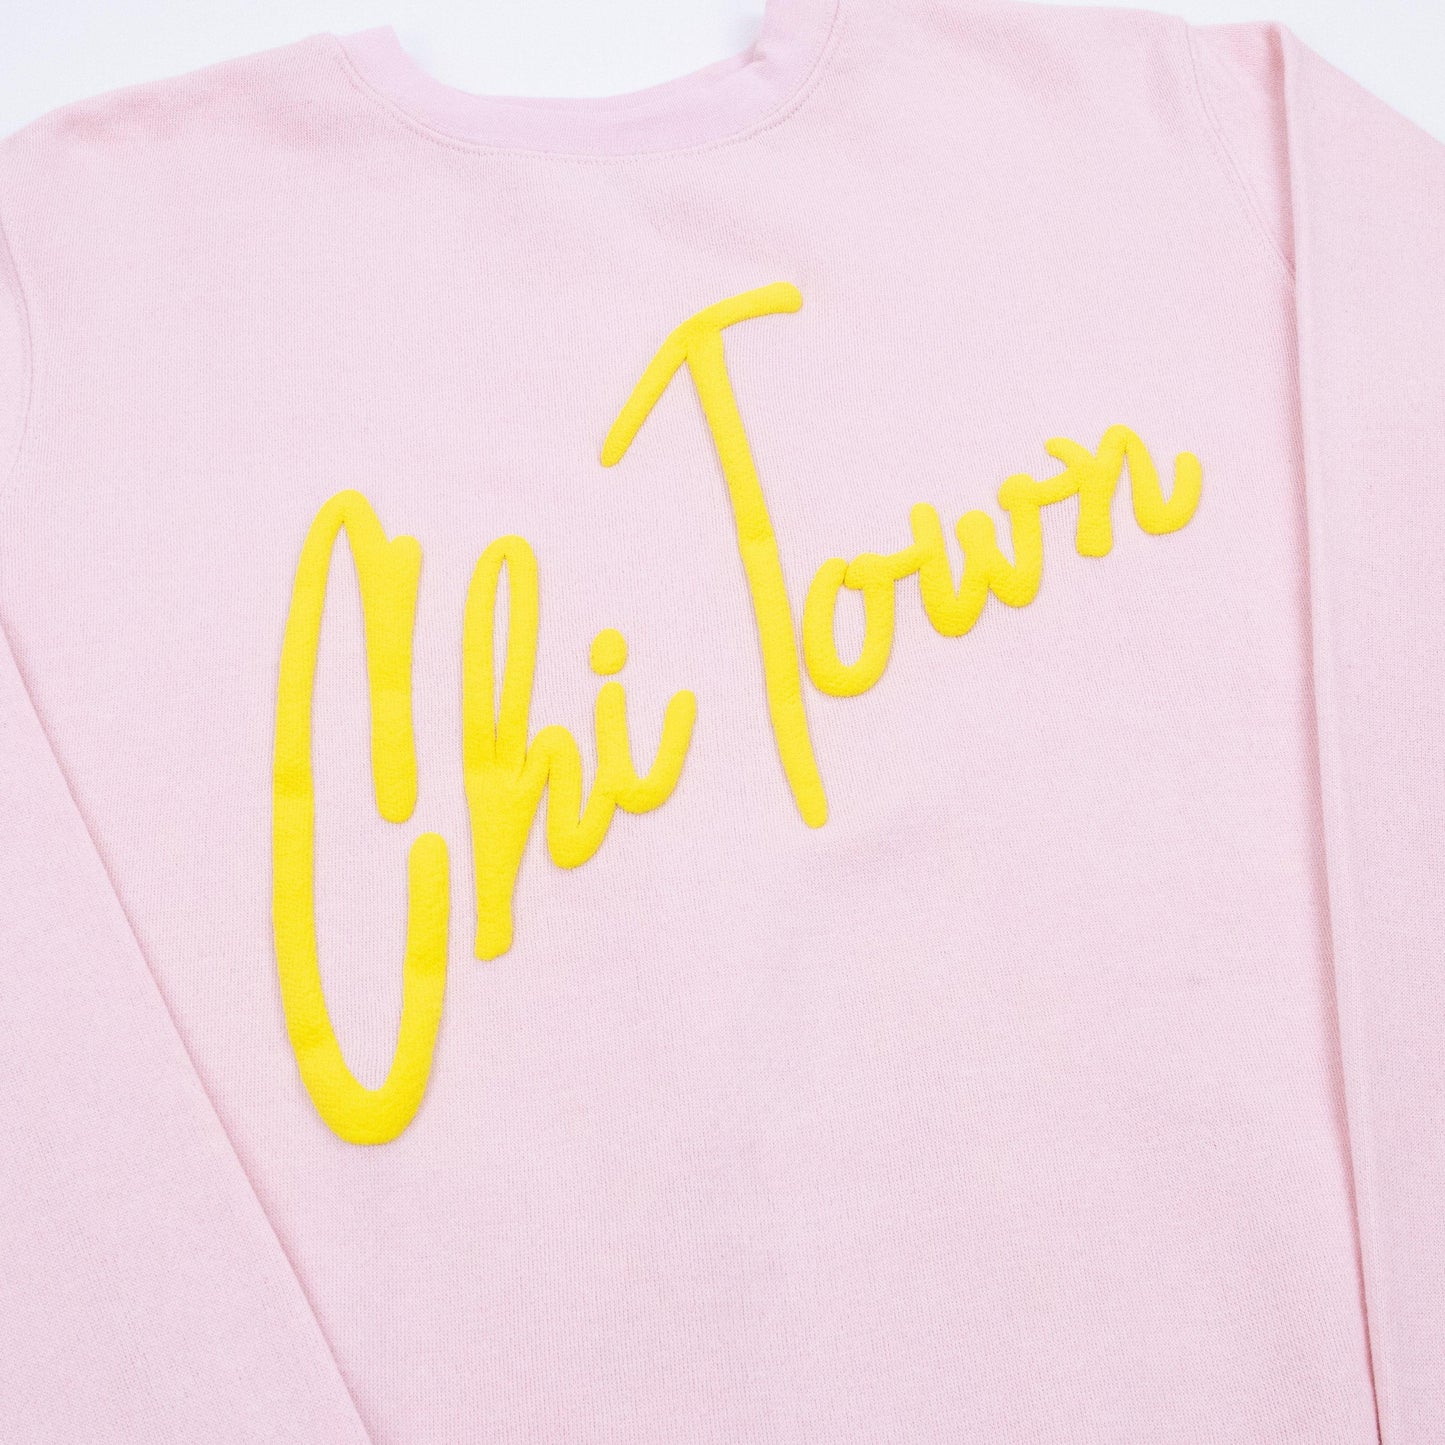 Trendy Chi Town Crewneck - Love From USA